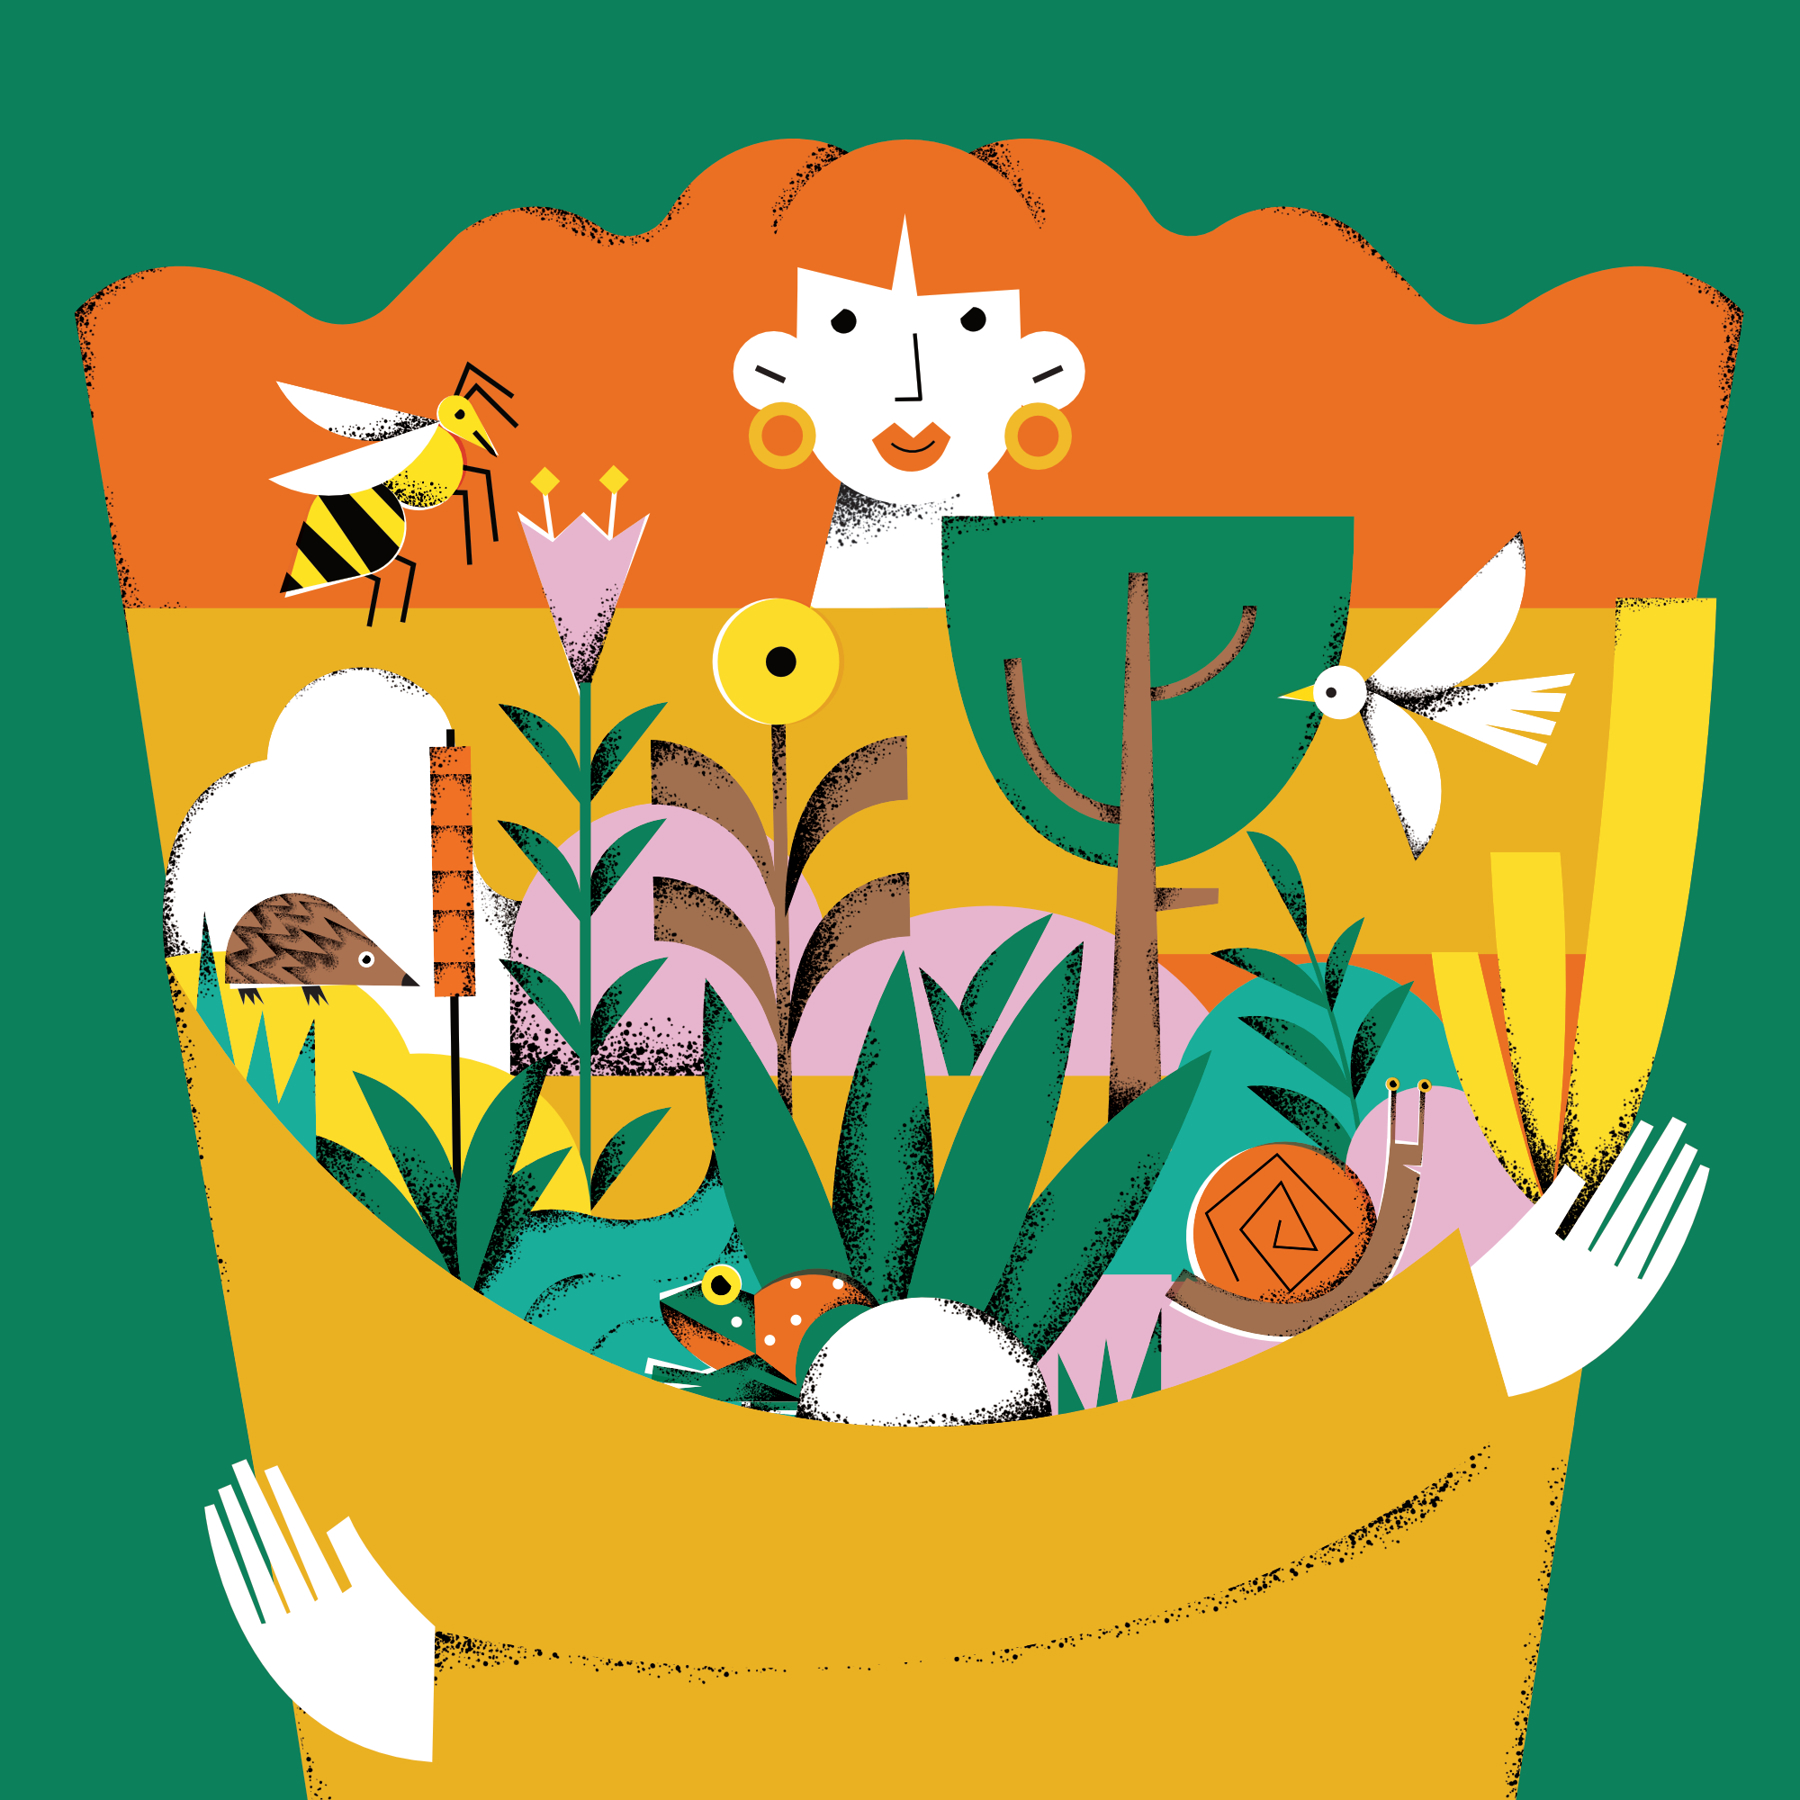 An illustration of a girl with long, flowing ginger hair wrapping her arms around a variety of plants and creatures.